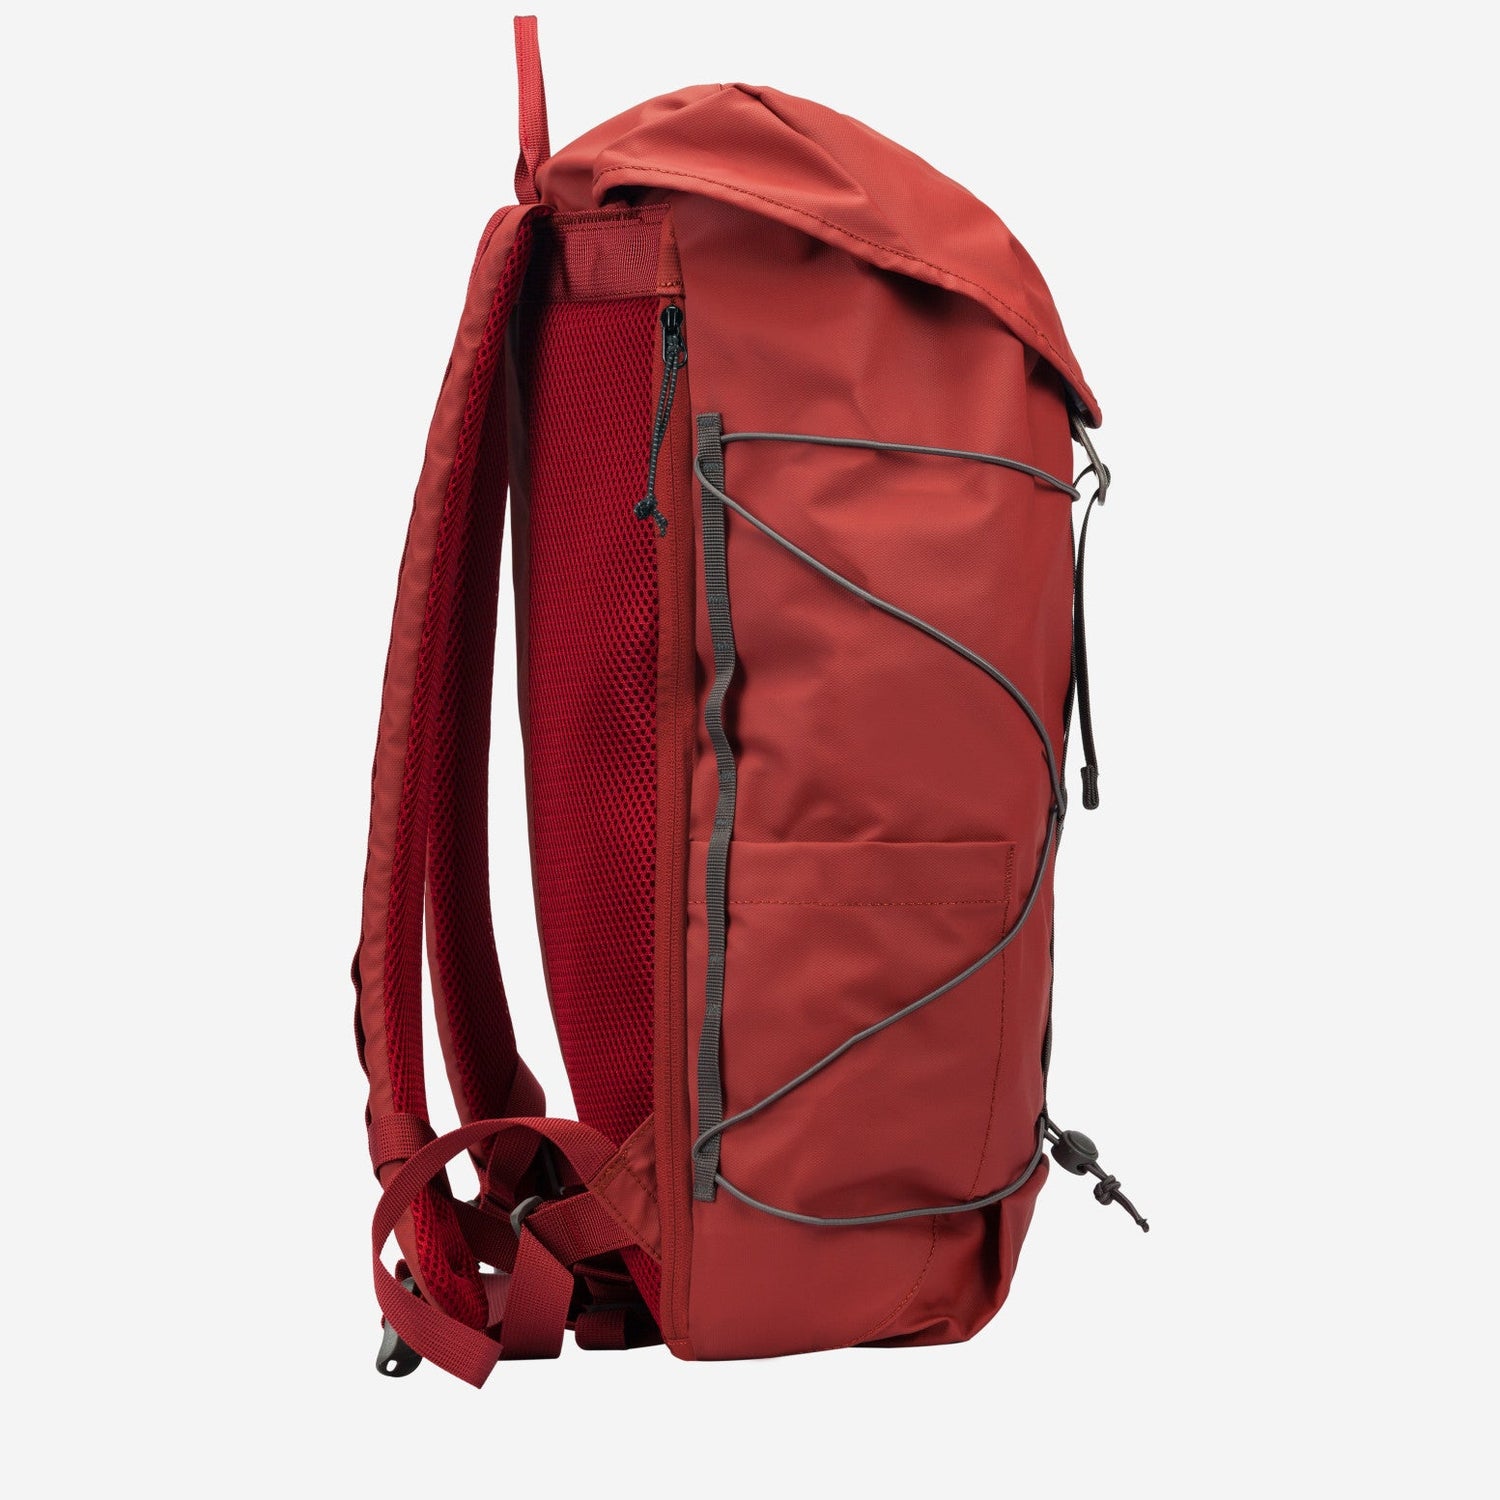 Wharfe Flap Over Backpack 22L Red - escape